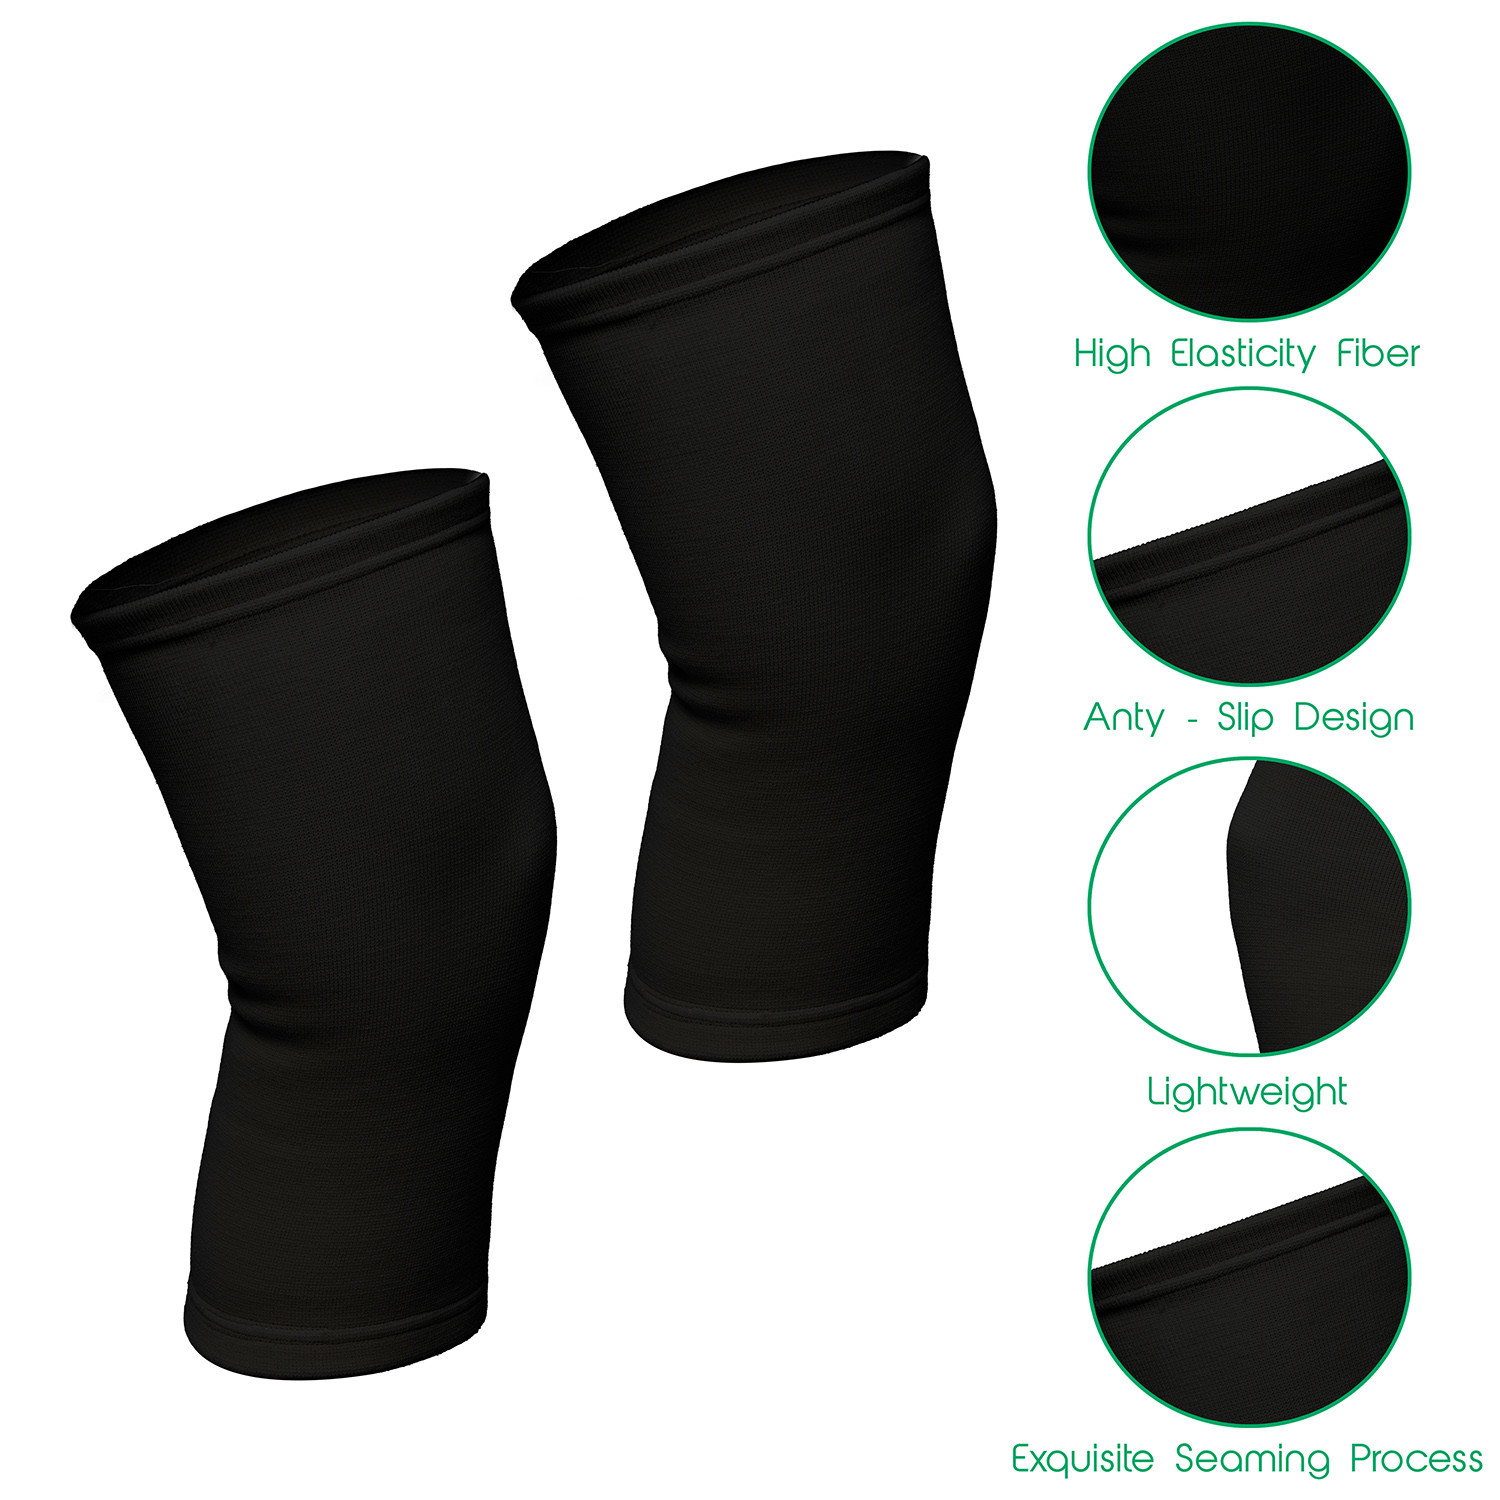 Kuber Industries Knee Cap | Cotton 4 Way Compression Knee Sleeves |Sleeves For Joint Pain | Sleeves For Arthritis Relief | Unisex Knee Wraps | Knee Bands |Size-S|1 Pair|Black